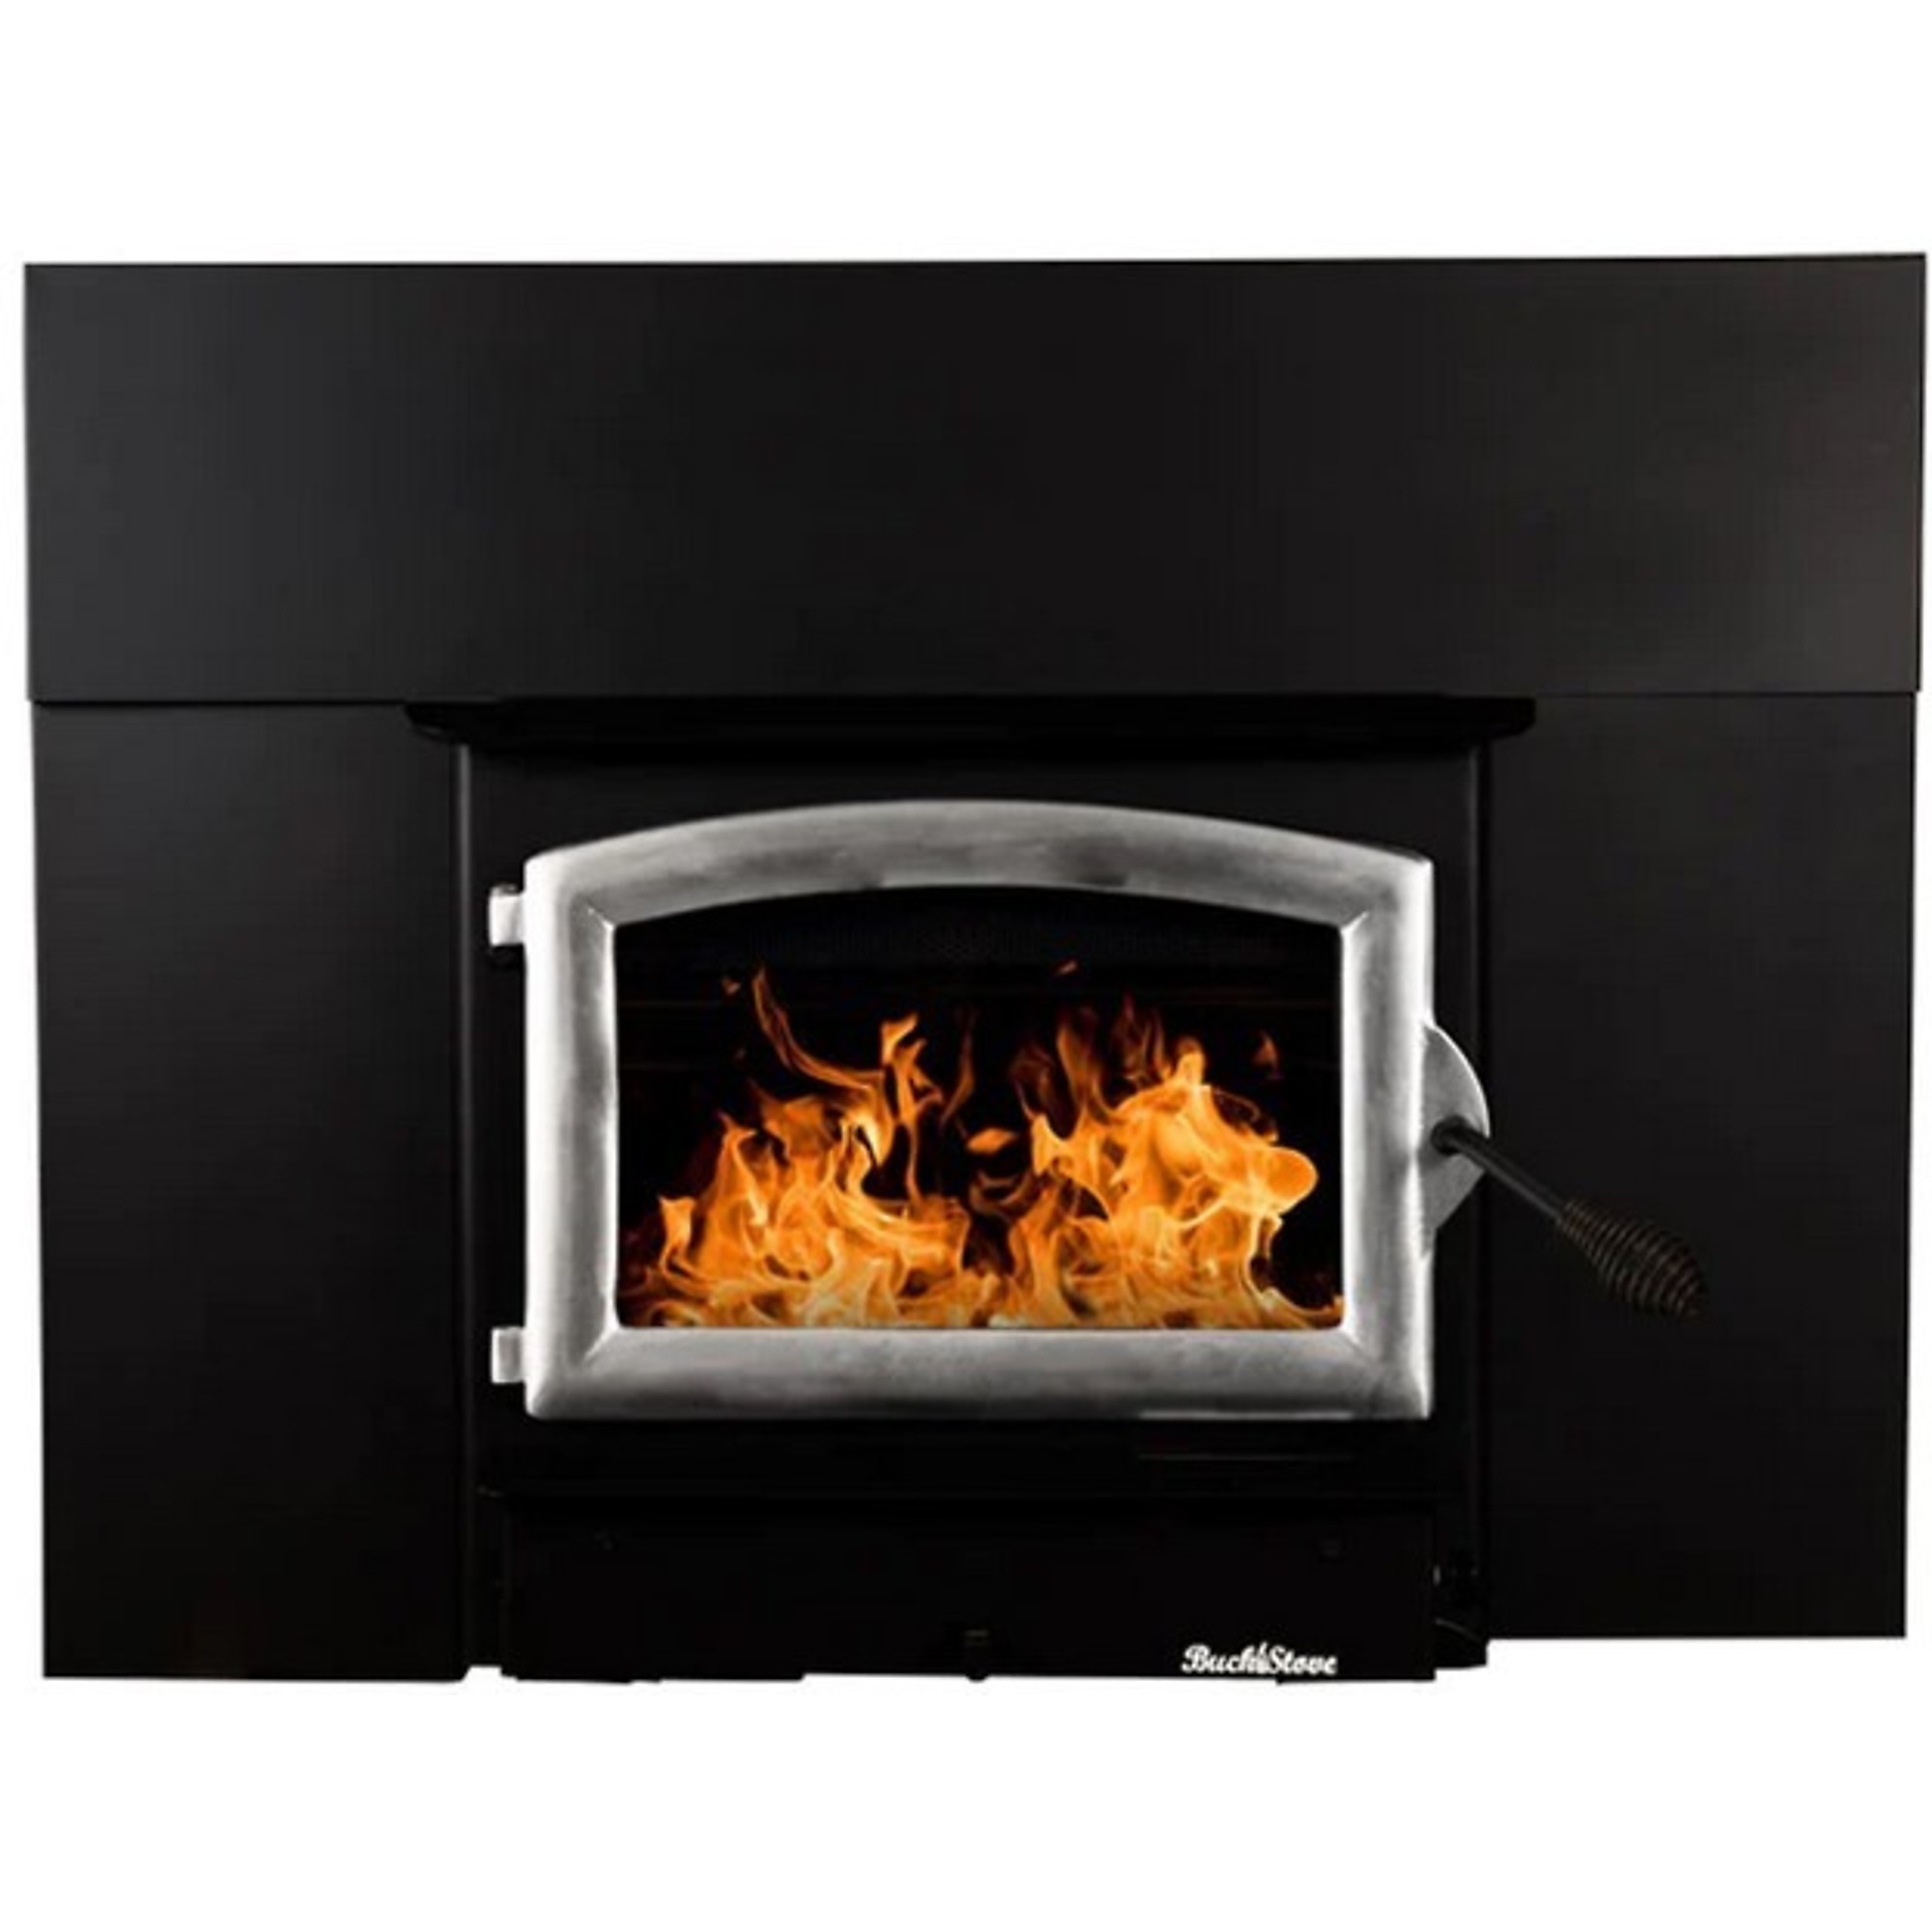 Buck, Wood Burning Insert with Peter Door and Blower, Heat Output 28901 Btu/hour, Heating Capability 1800 ftÂ², Model FP 21PSI